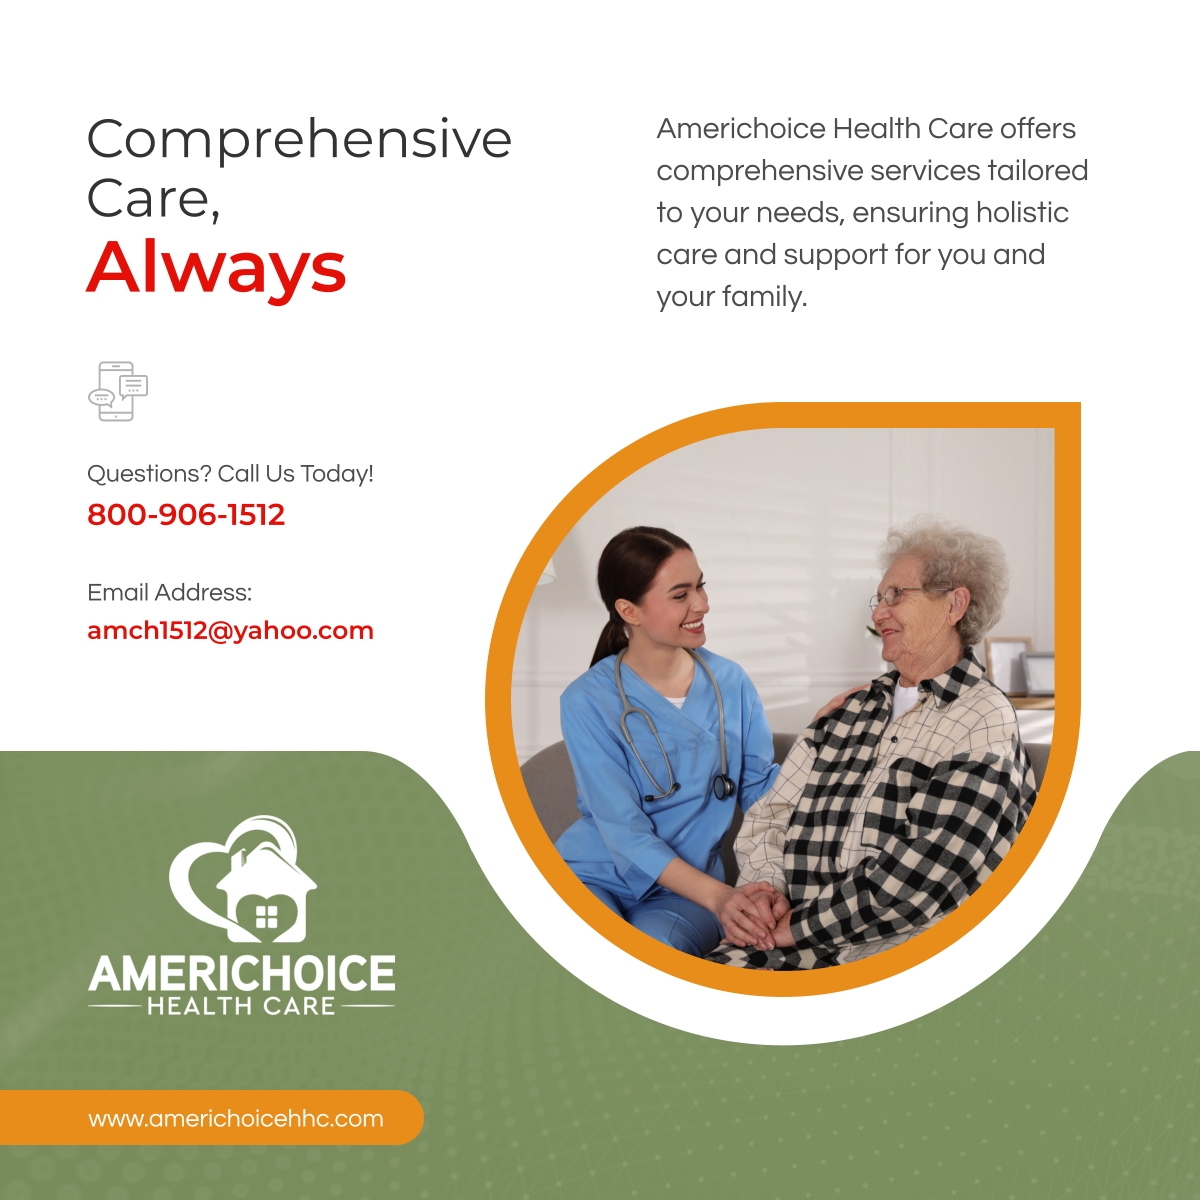 Experience comprehensive care and support with Americhoice Health Care. Let us be your partner in health and wellness.

#HomeHealthCare #NorthbrookIL #ComprehensiveCare